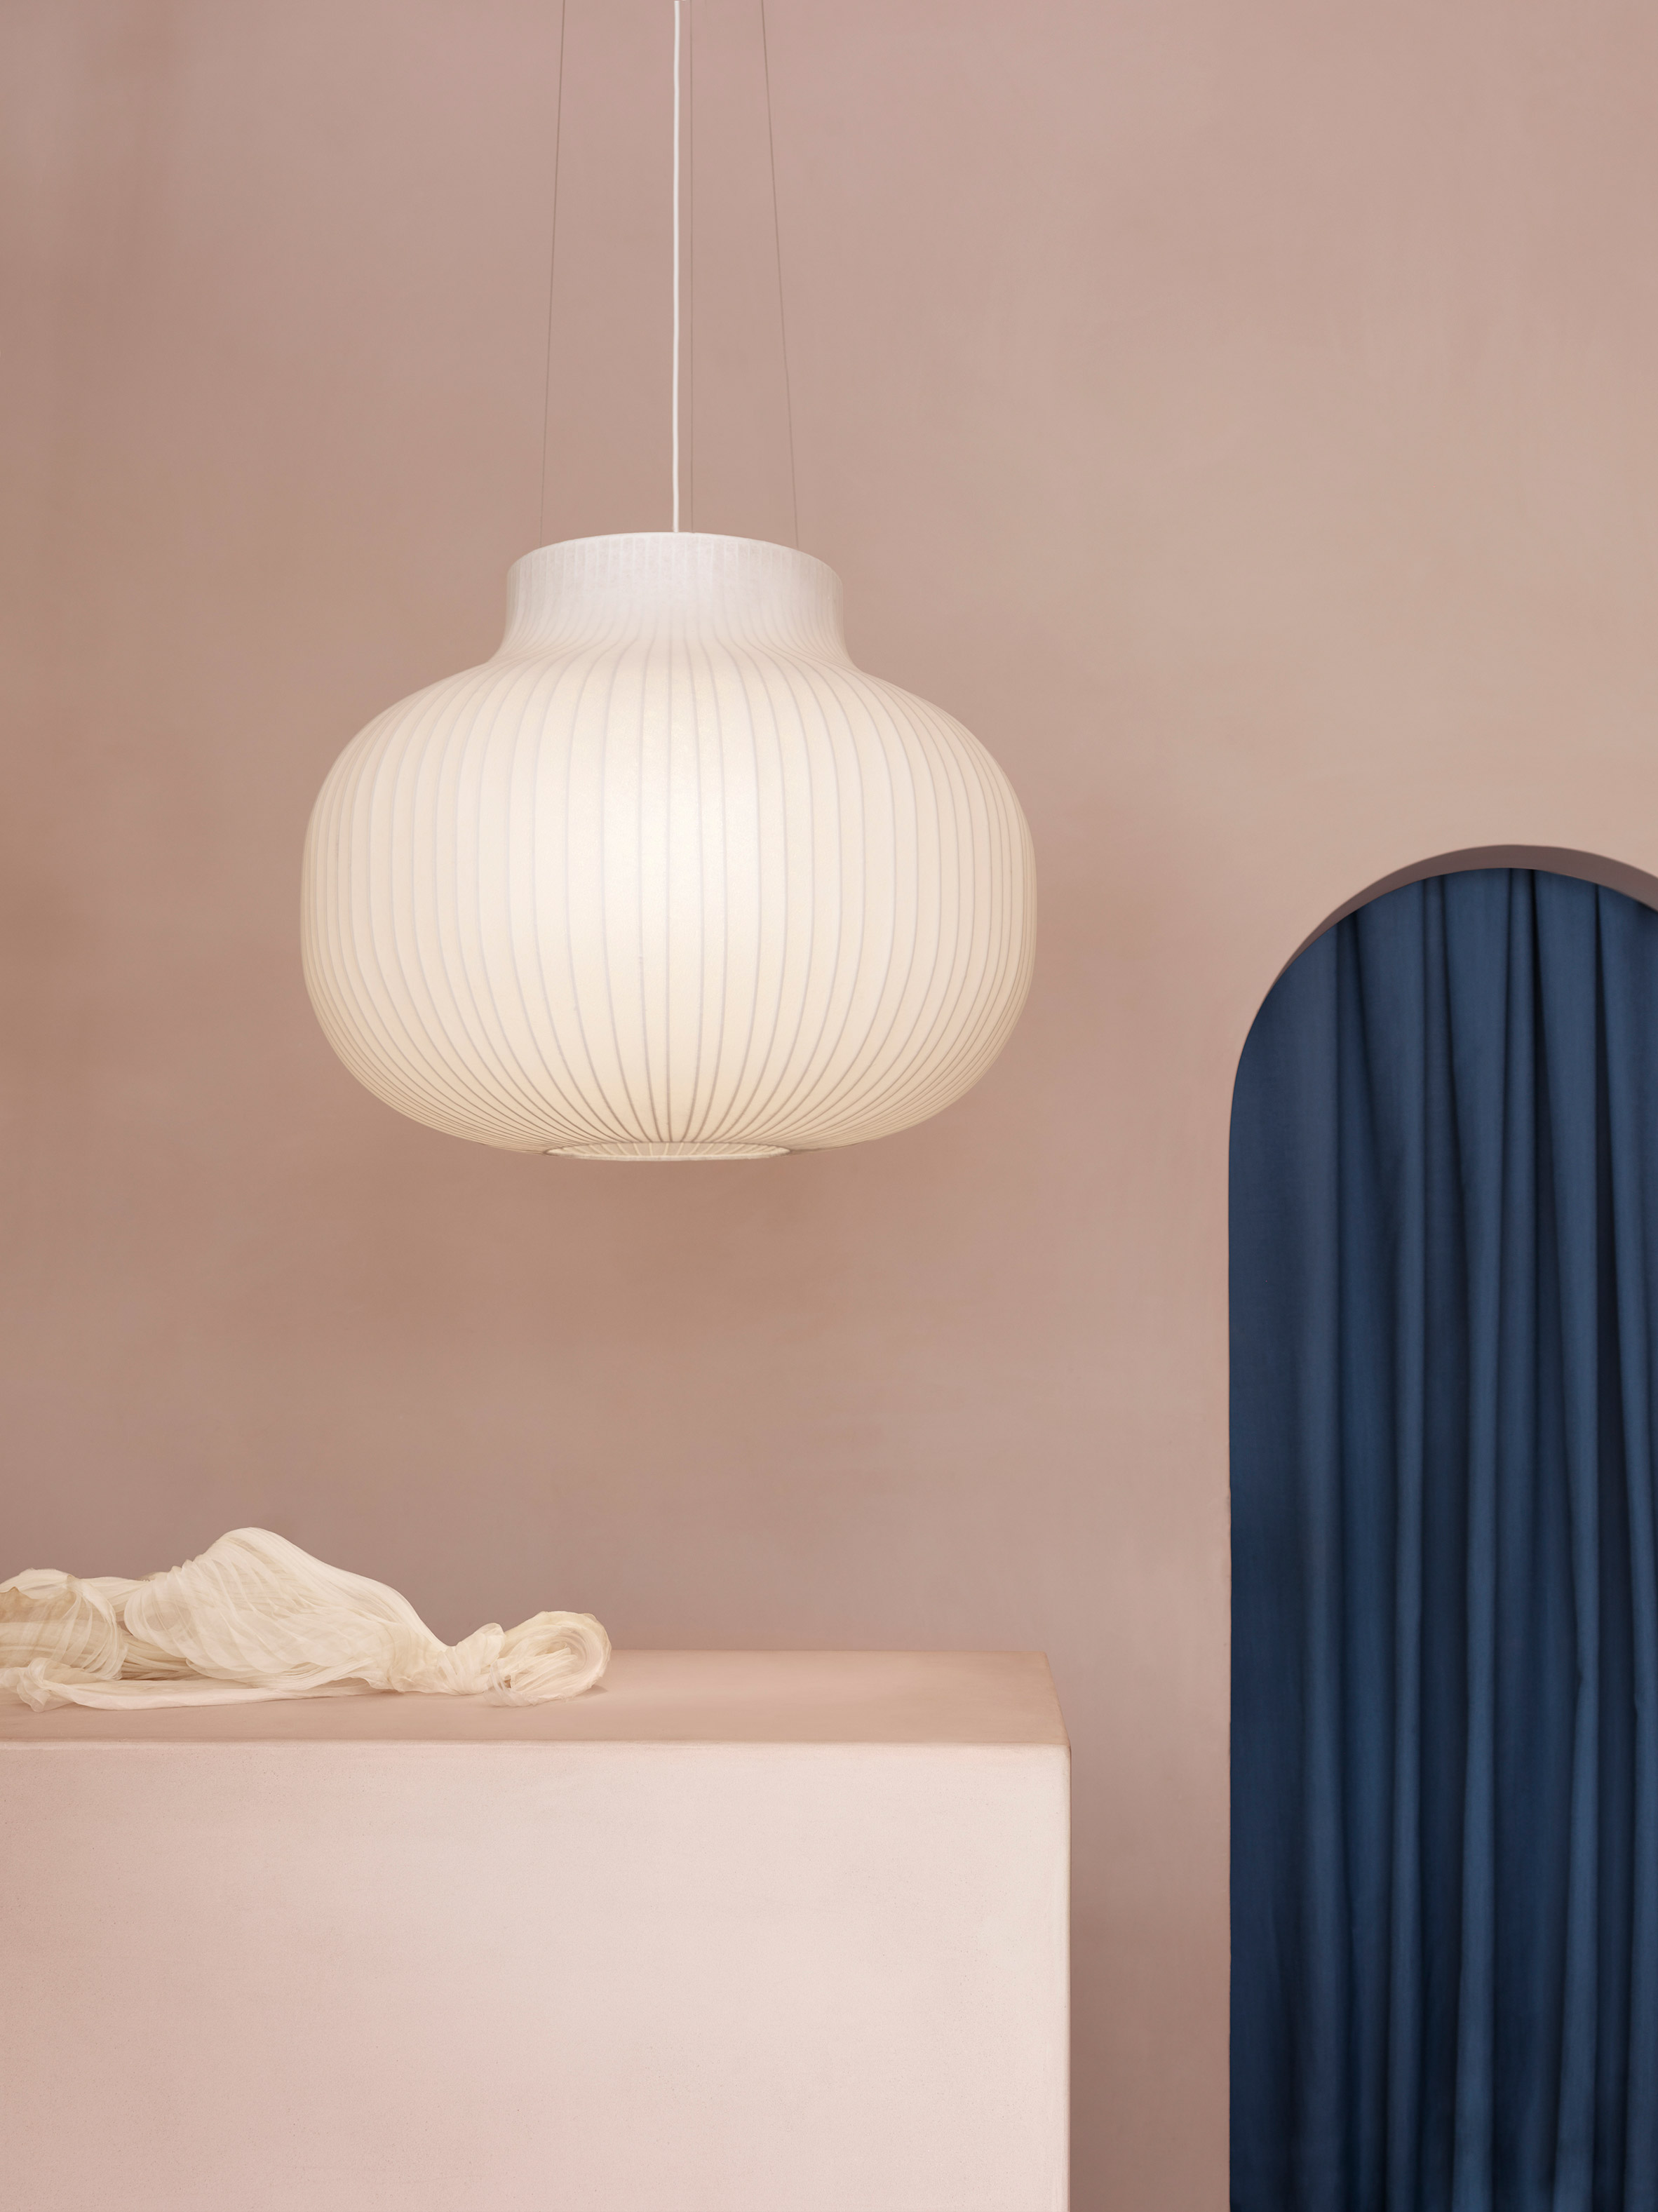 Layer designs pendant lamps based on silkworm cocoons Muuto